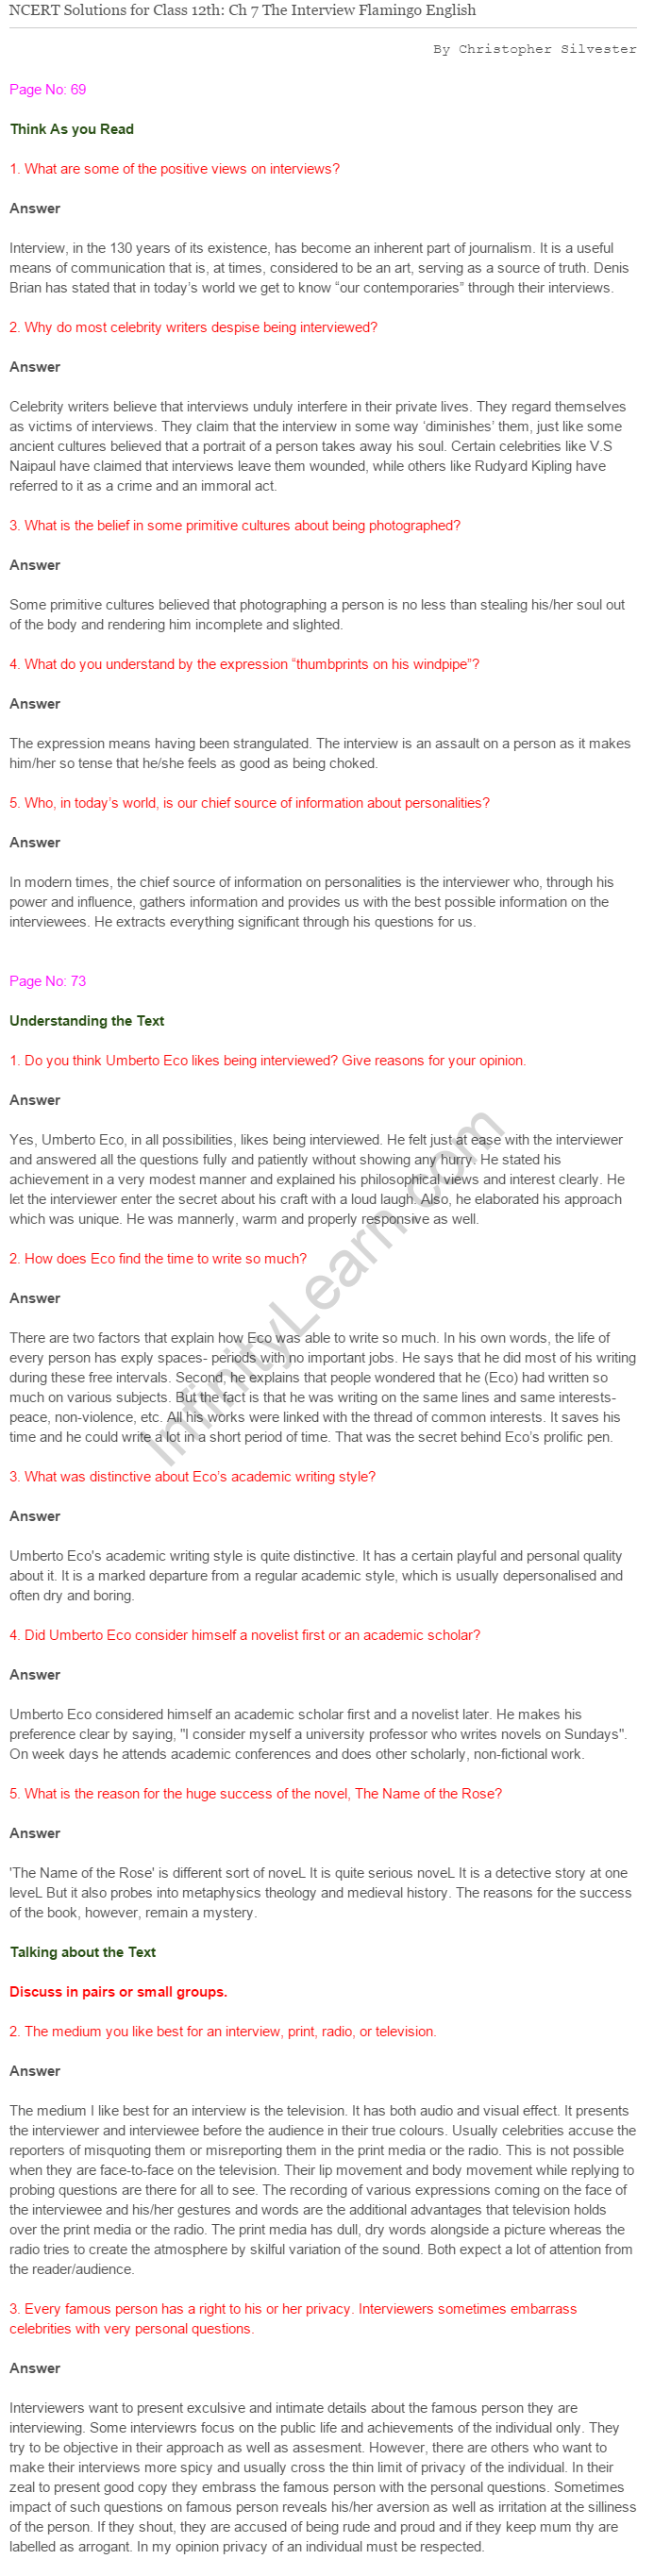 NCERT Solutions For Class 12 Flamingo English The Interview